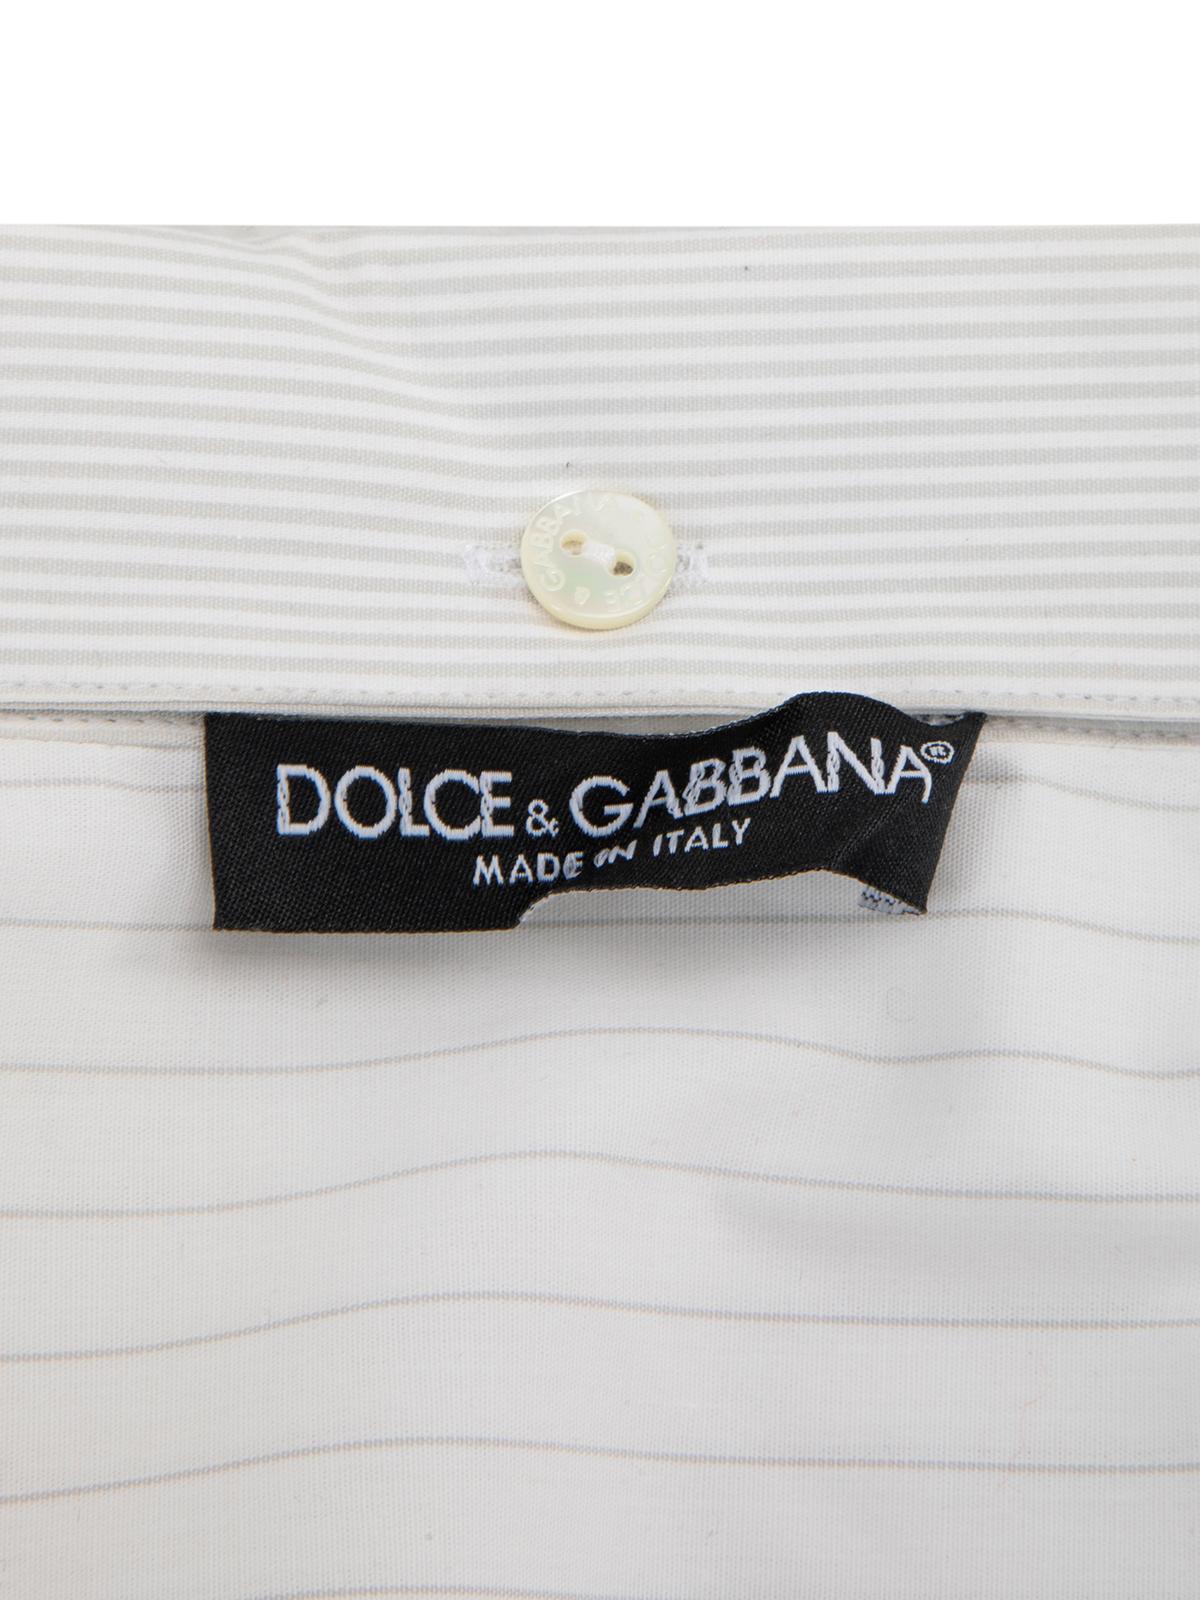 Pre-Loved Dolce & Gabbana Women's White Striped Cotton Shirt with Detachable For Sale 3